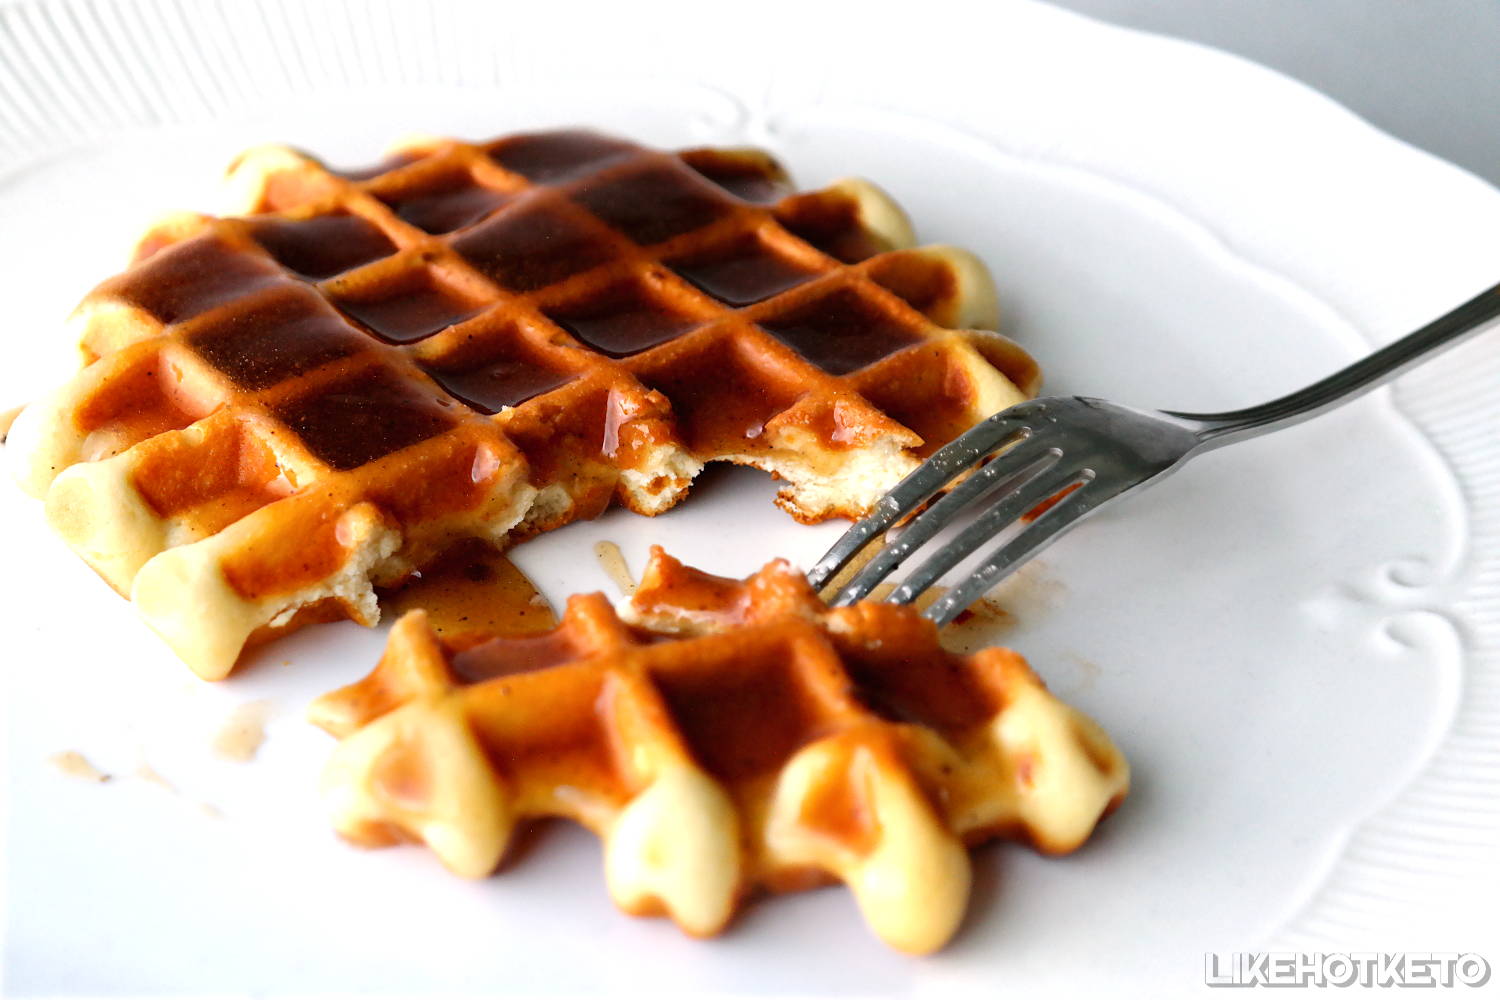 A keto waffle topped with sugar-free maple syrup, cut with a fork, syrup drizzling away over the plate.